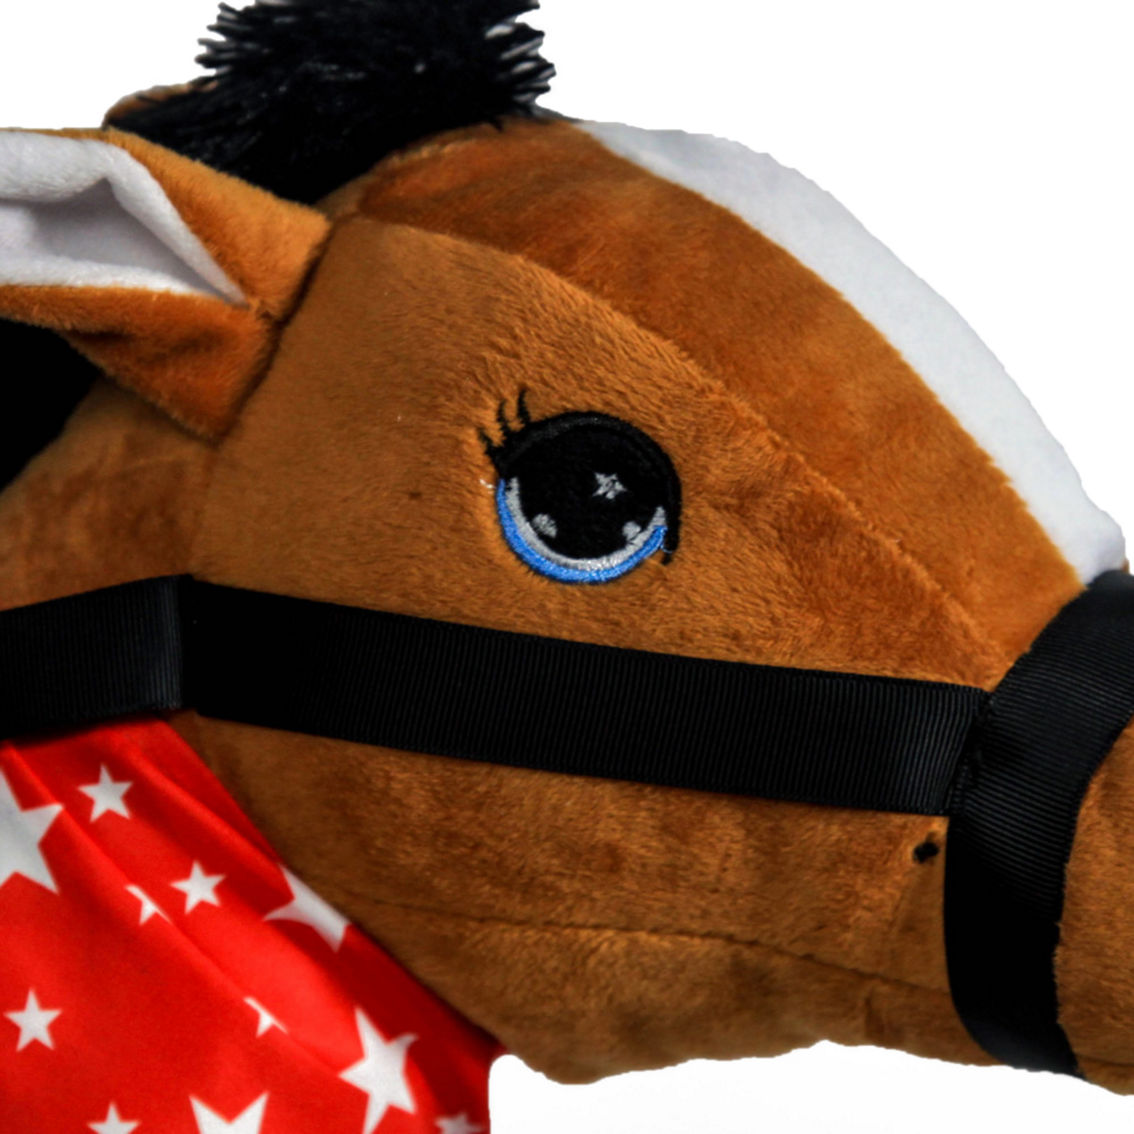 Ponyland Toys Stick Horse with Sound, Brown Horse - Image 5 of 6